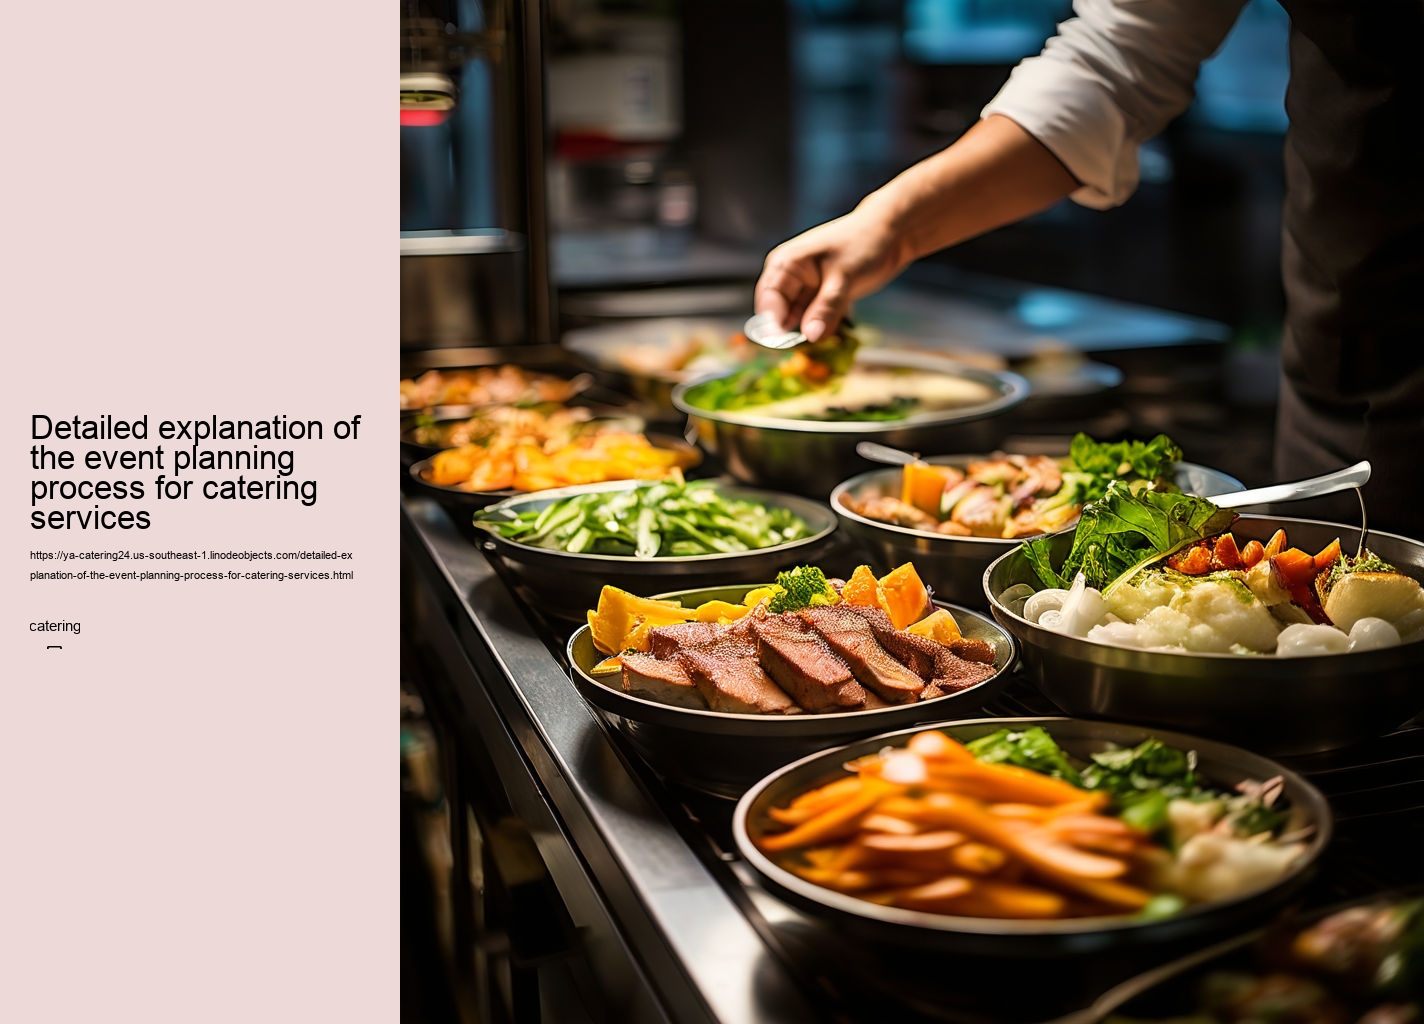 Detailed explanation of the event planning process for catering services